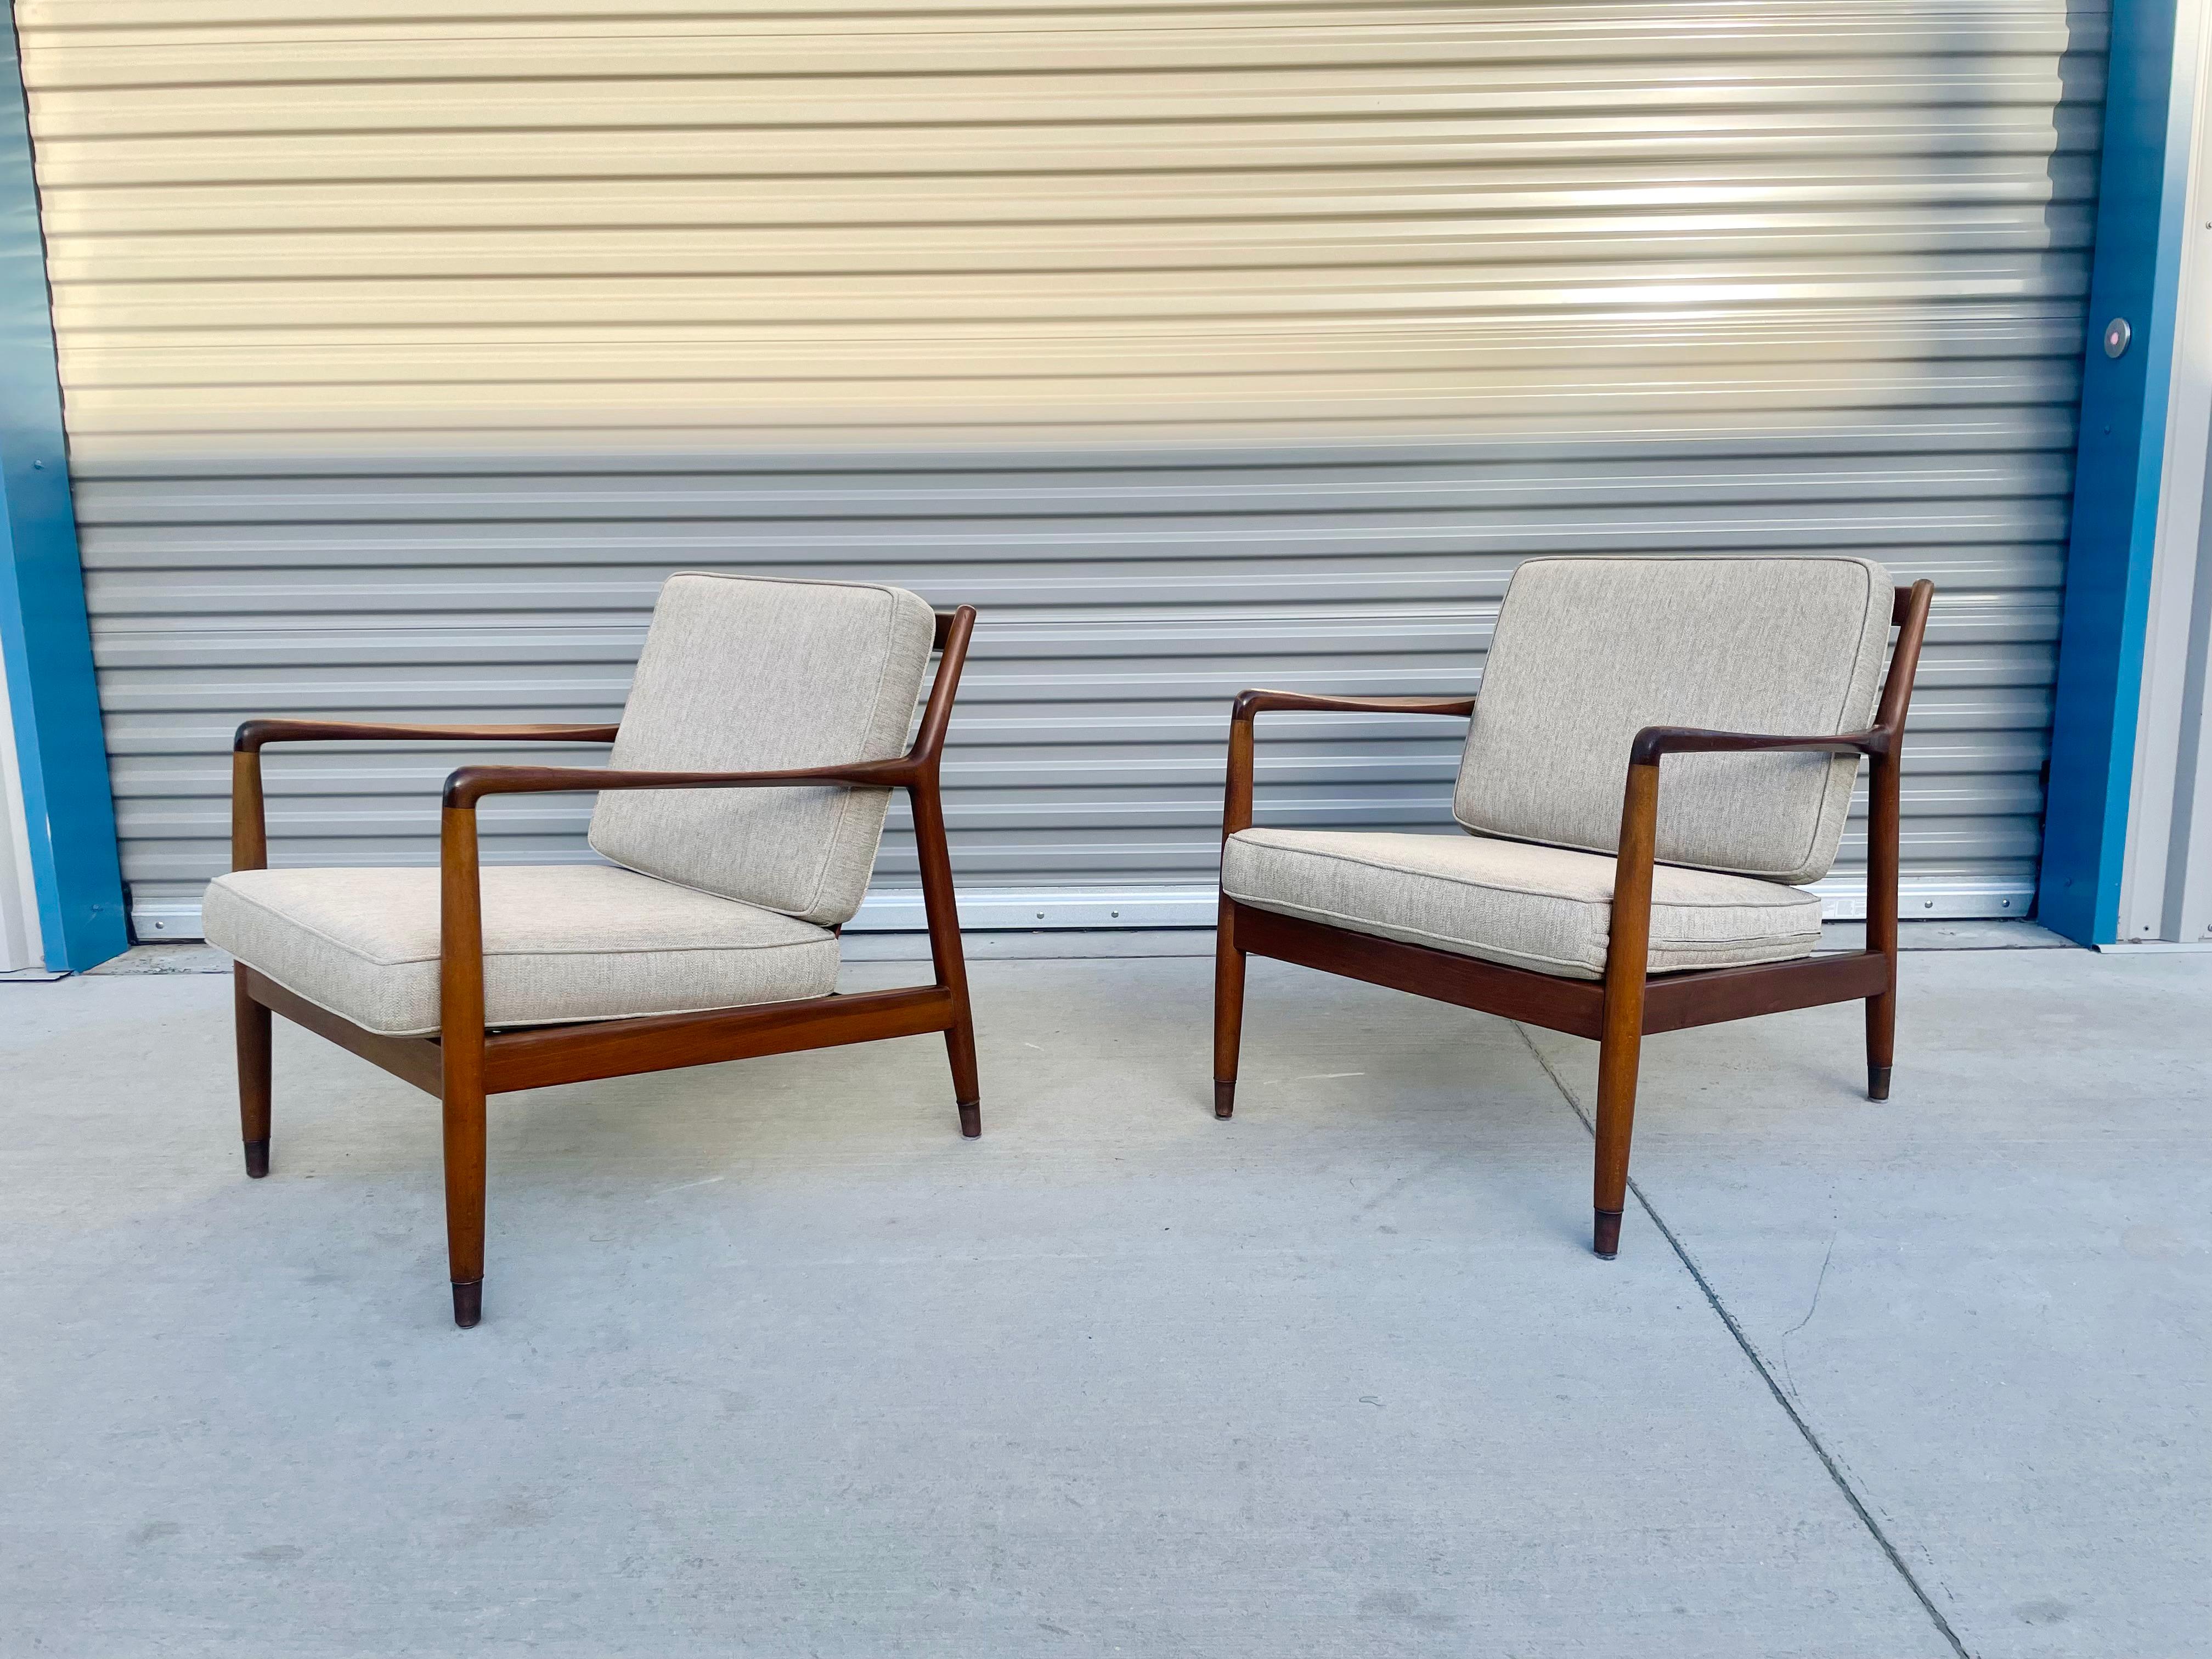 Vintage Folke Ohlsson model USA-143 lounge chairs manufactured by dux circa the 1950s. These mid-century lounge chairs were made of the highest quality walnut, giving them an excellent color tone and beautiful grain patterns. The chairs also feature